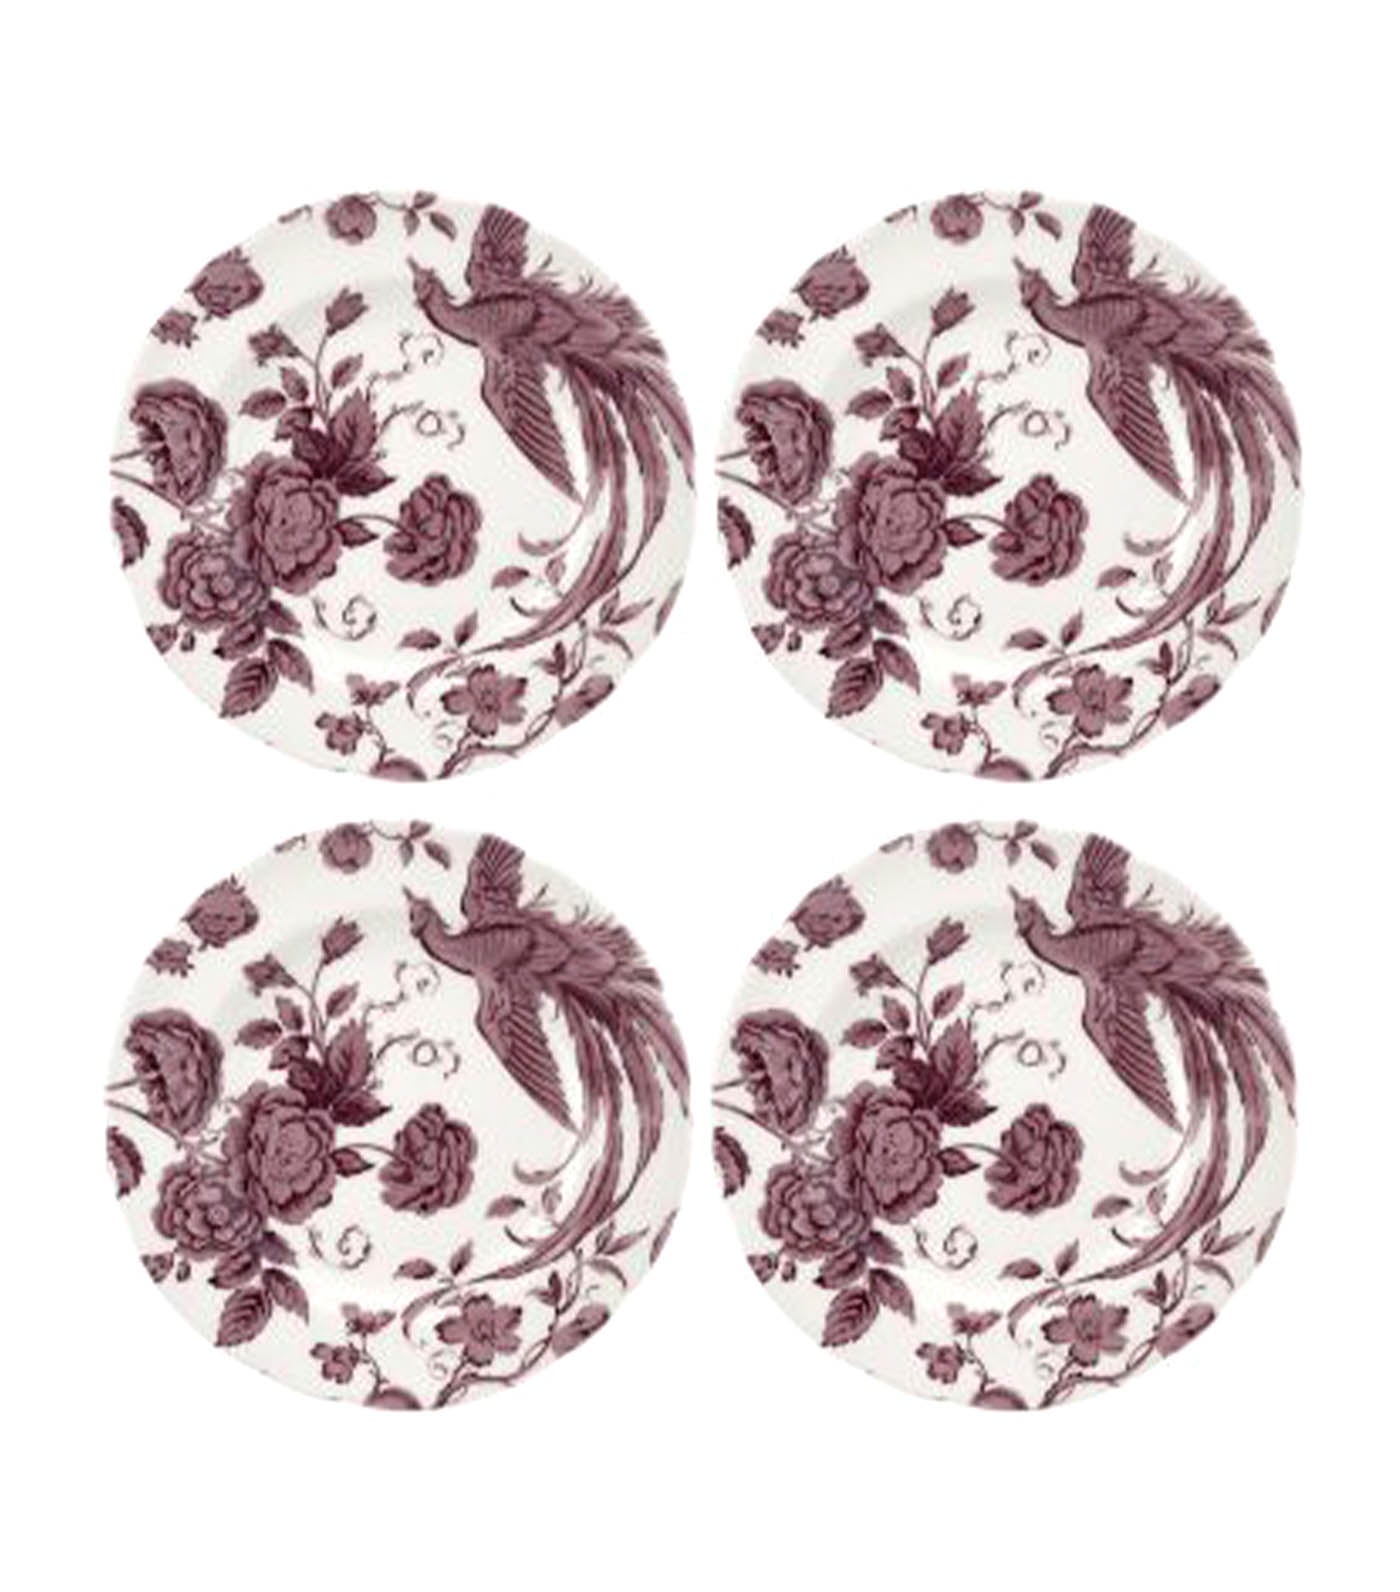 Spode Kingsley Collection - White